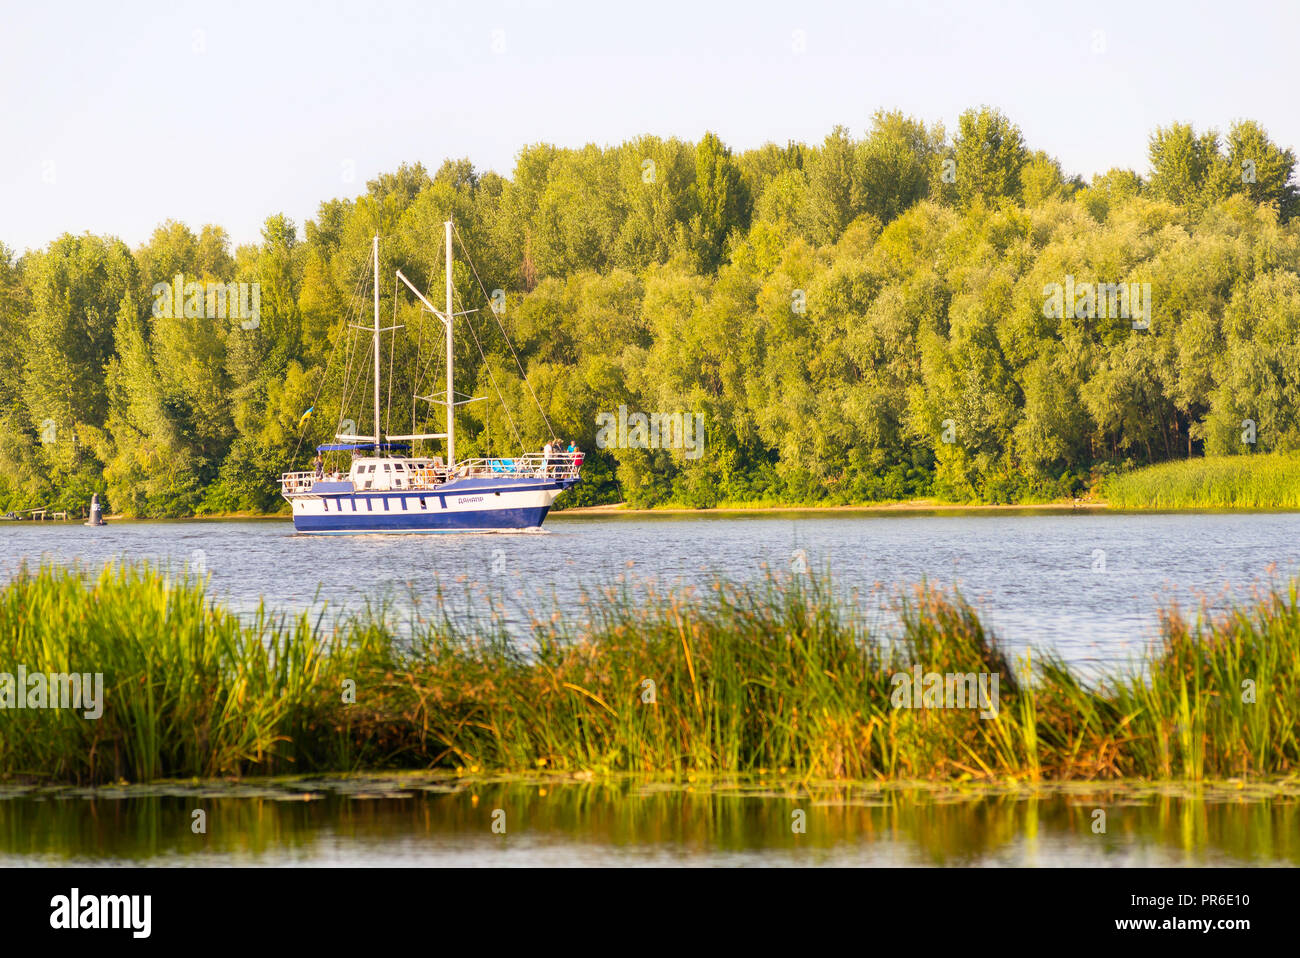 Kiev / Ukraine - August 31, 2018 - The 'Danapr' boat navigates close to the shore covered by trees, on the Dnieper river in Kiev, Ukraine, during a cl Stock Photo